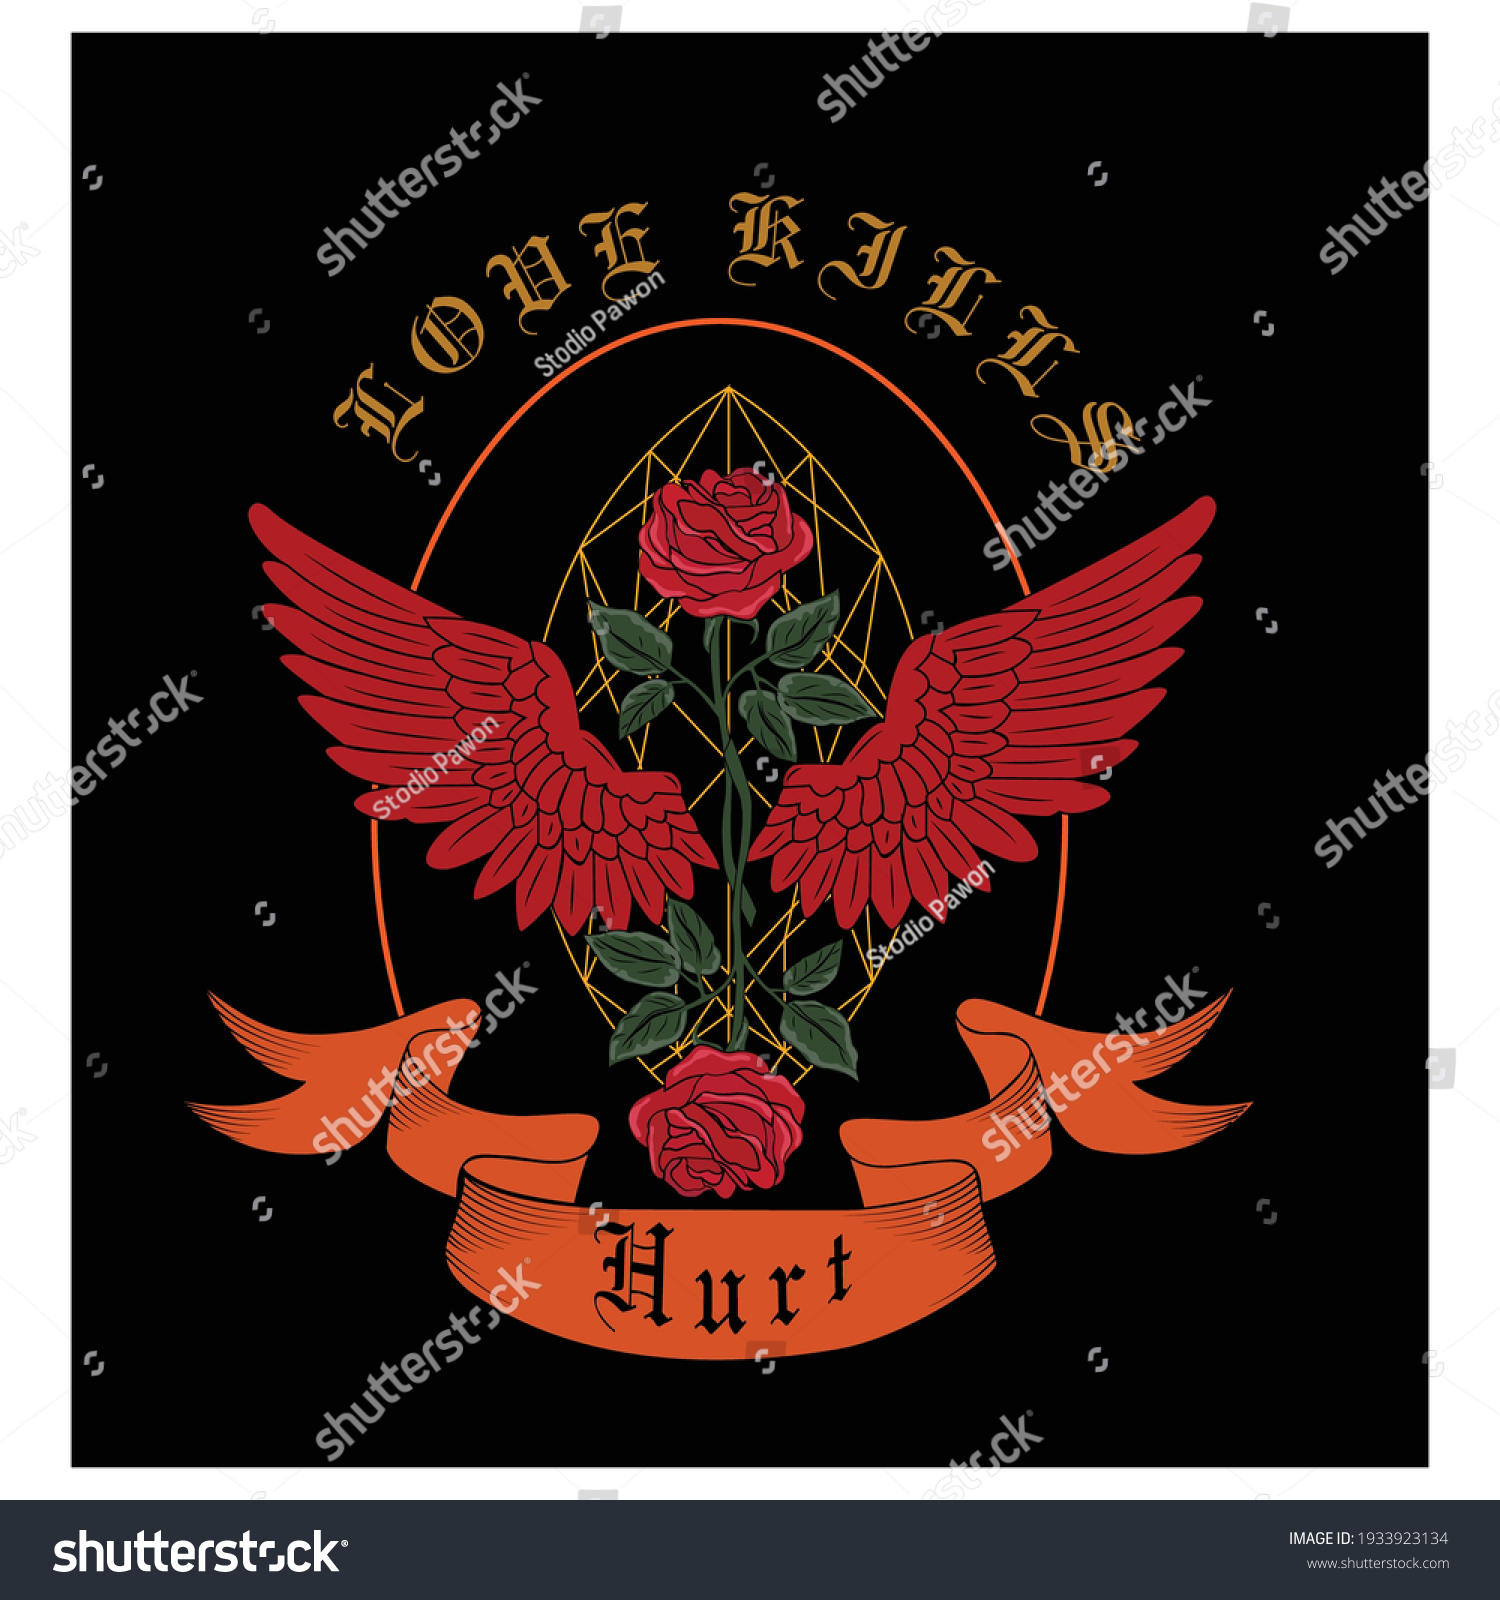 Wings rose Images, Stock Photos & Vectors | Shutterstock